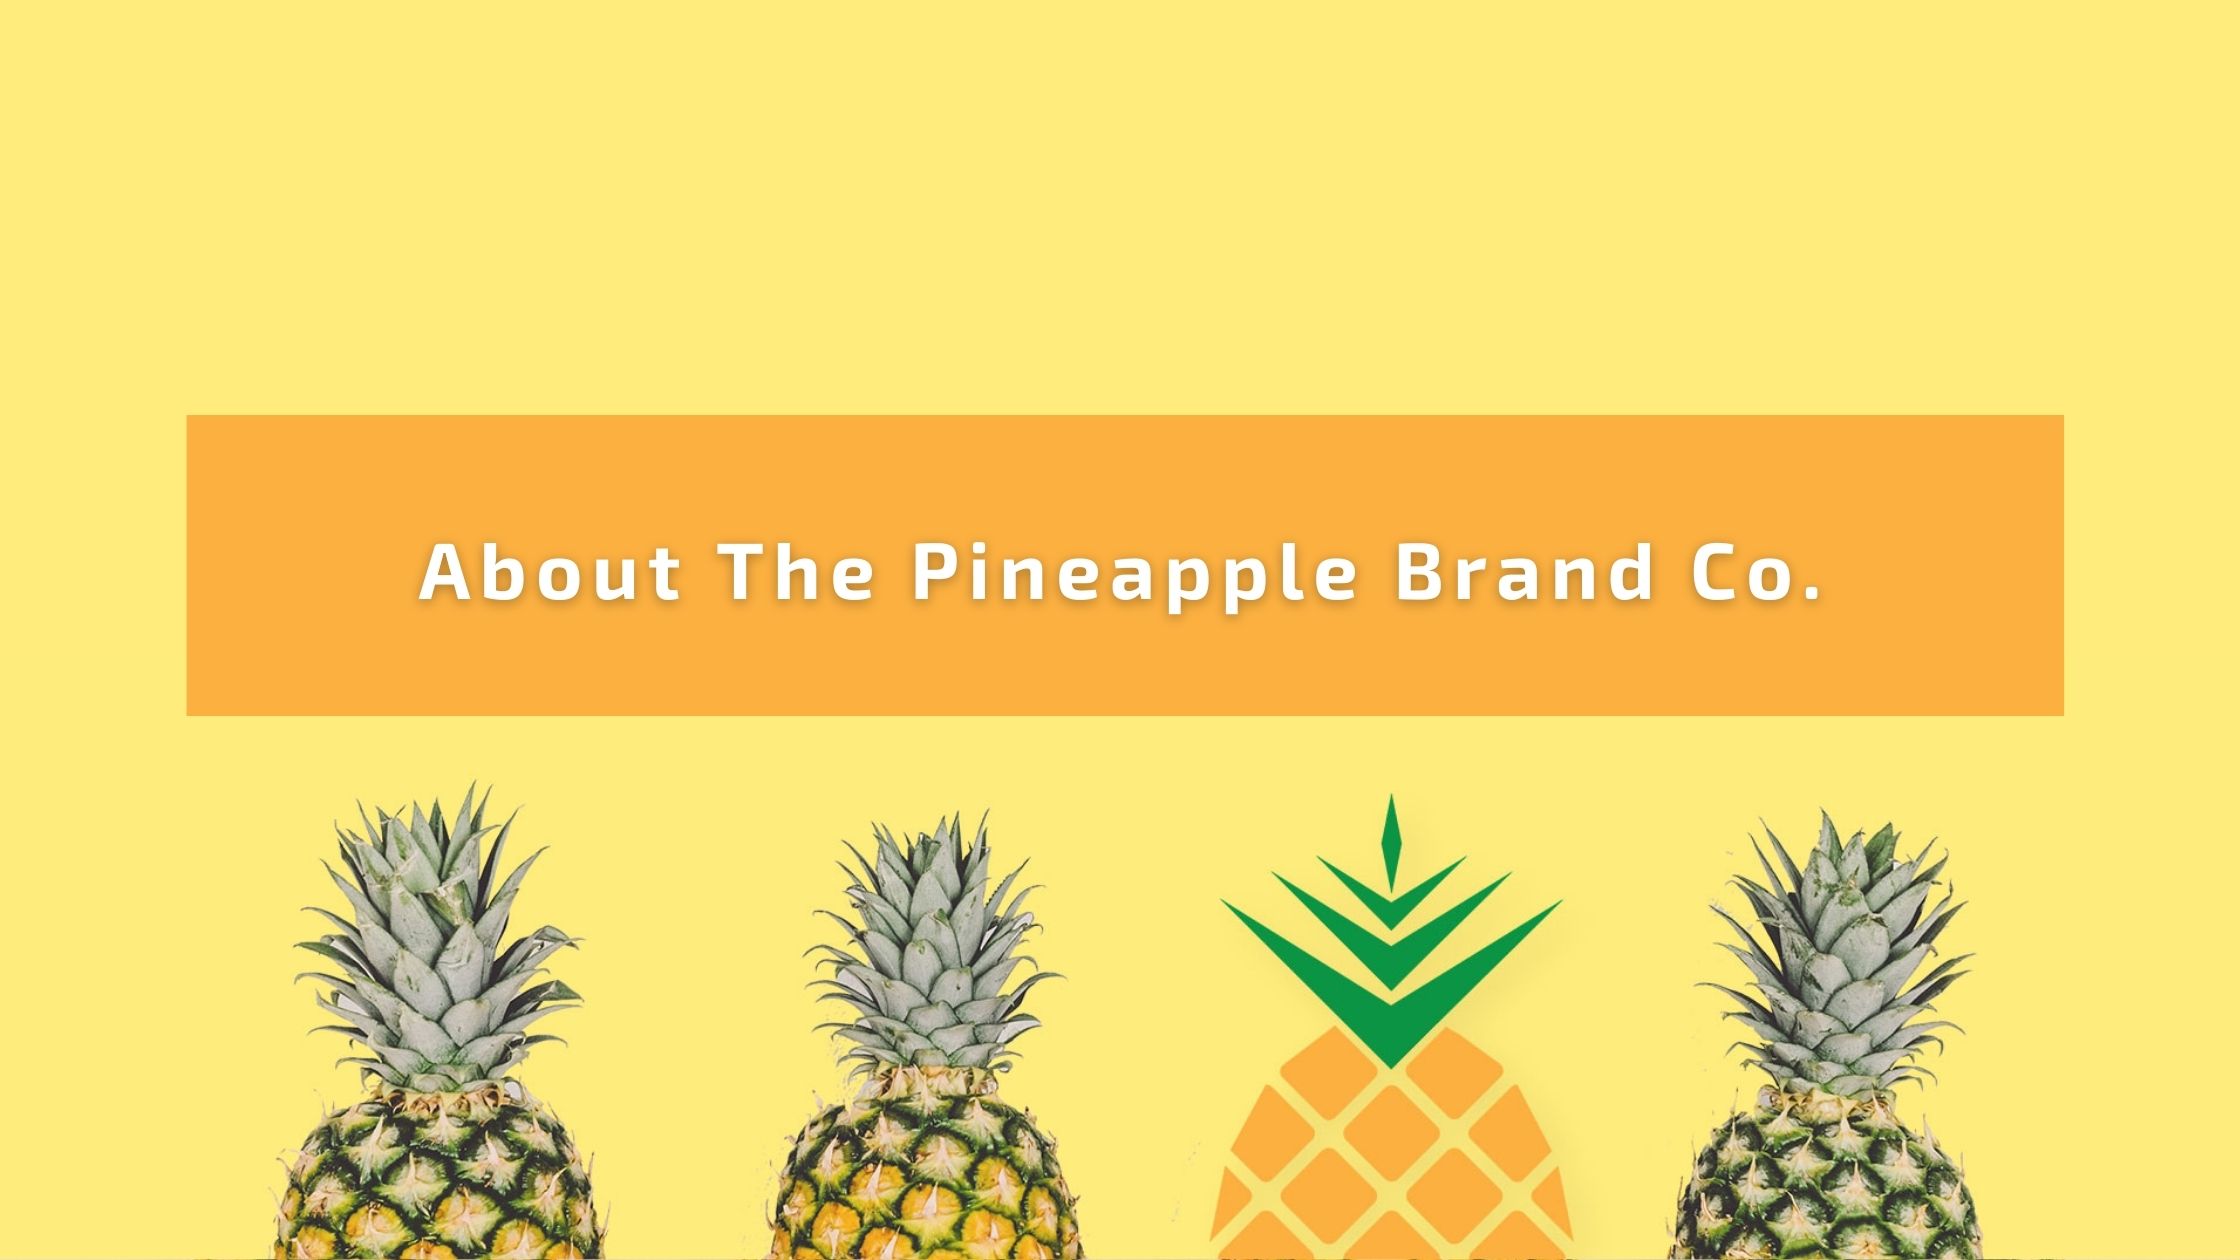 Real Estate & Management - The Pineapple Brand Company